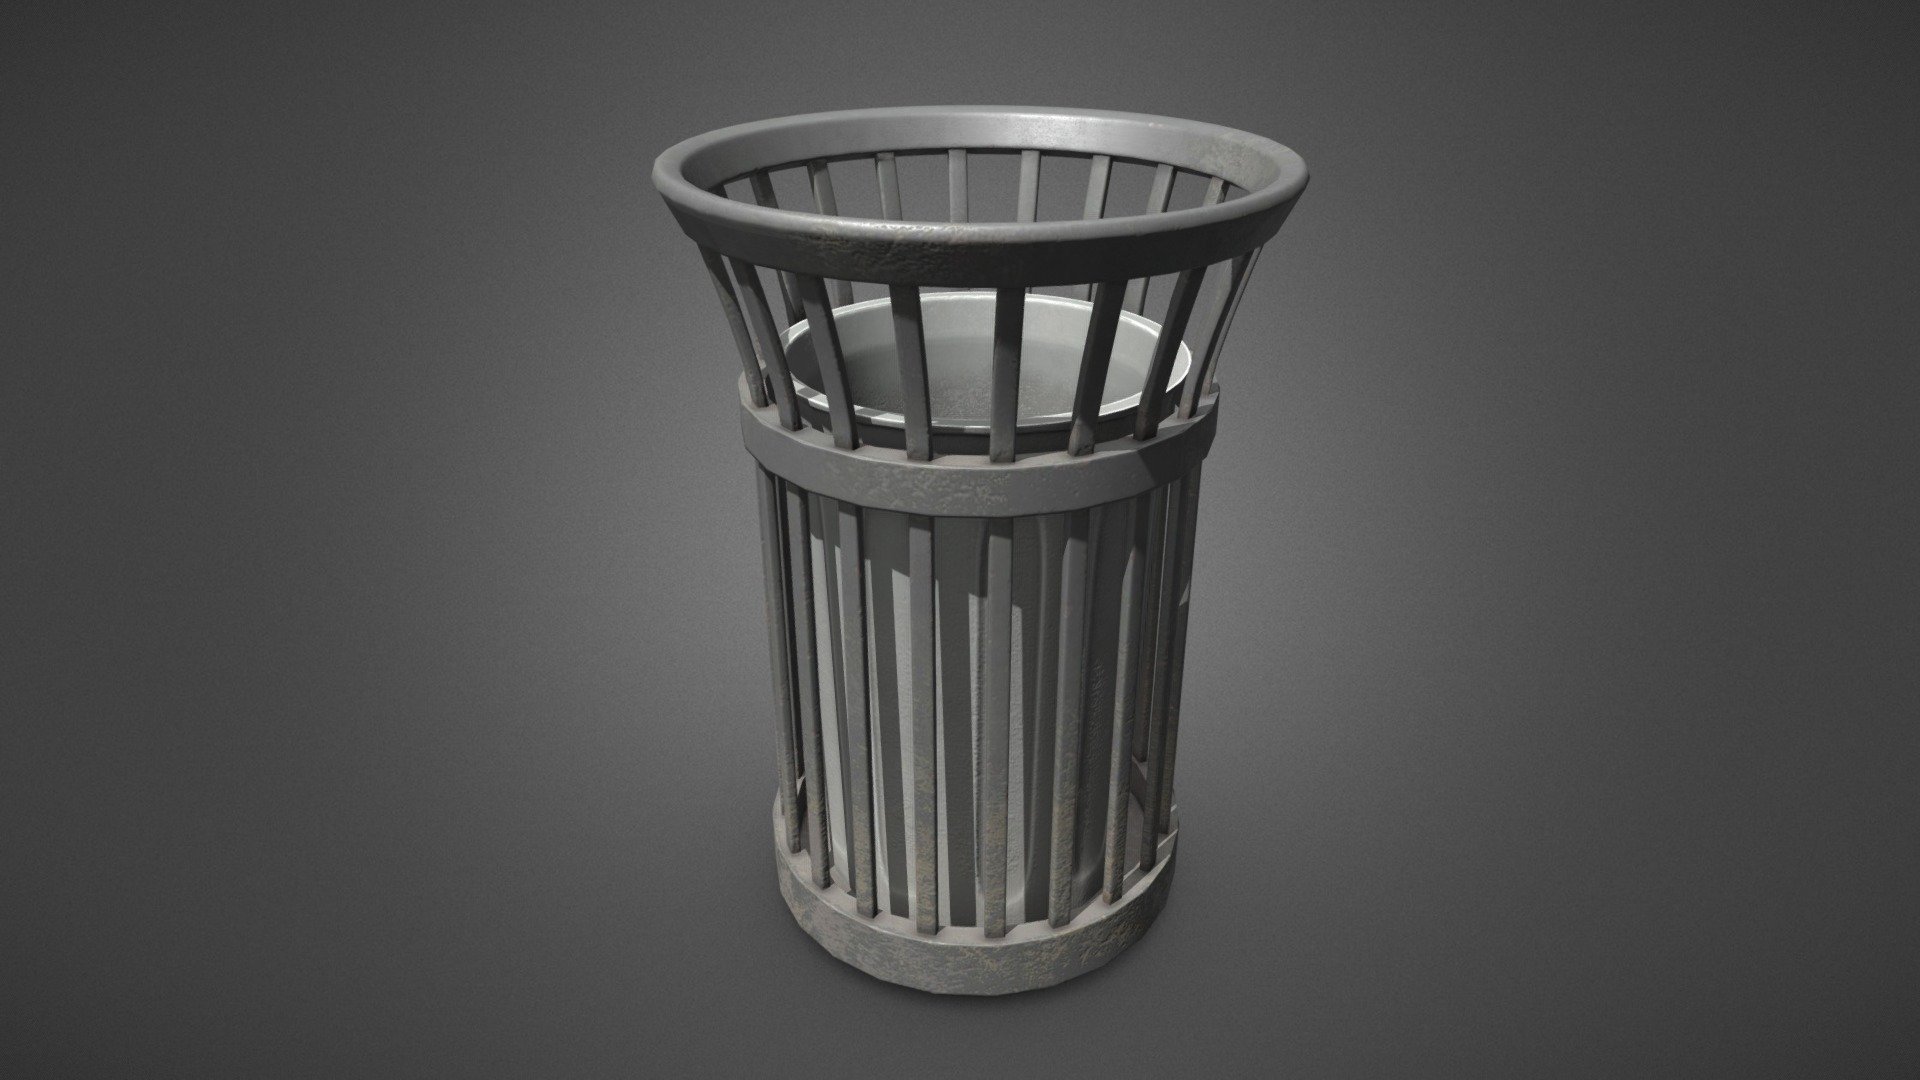 Low-poly, game-ready model of a City Garbage Can (Garbage Bin, Trash Bin).

TEXTURES

High resolution PBR Metal/Roughness textures are provided in the additional files.

Texture size: 2048 x 2048
Texture format: PNG 8 bit (uncompressed)




Base Color (Diffuse)

Metallic

Roughness

Height

Normal 

Ambient Occlusion

This asset is part of our City collection which features many more models to re-create the perfect city for your projects!

Check out all our City models here - City Garbage Can - 3D model by Ringtail Studios (@ringtail) 3d model